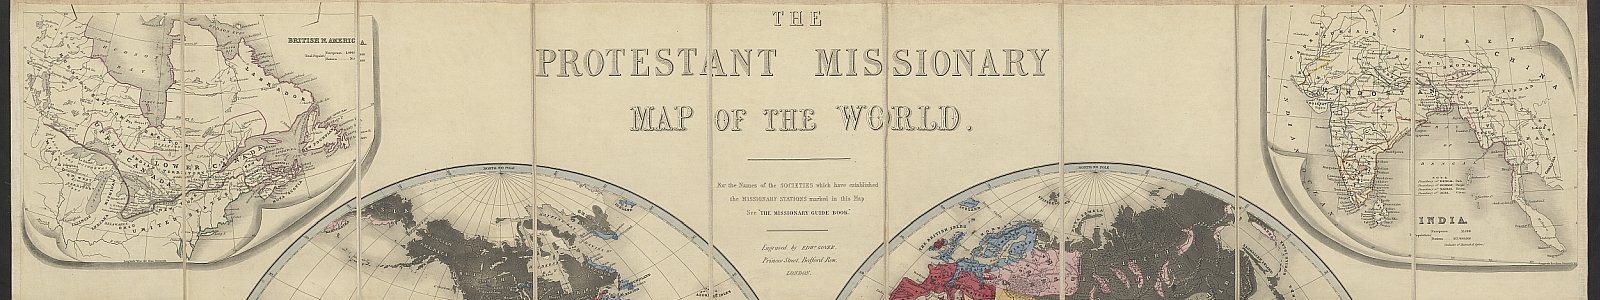 Detail van 'The Protestant missionary map of the world', Edward Gover, 1846